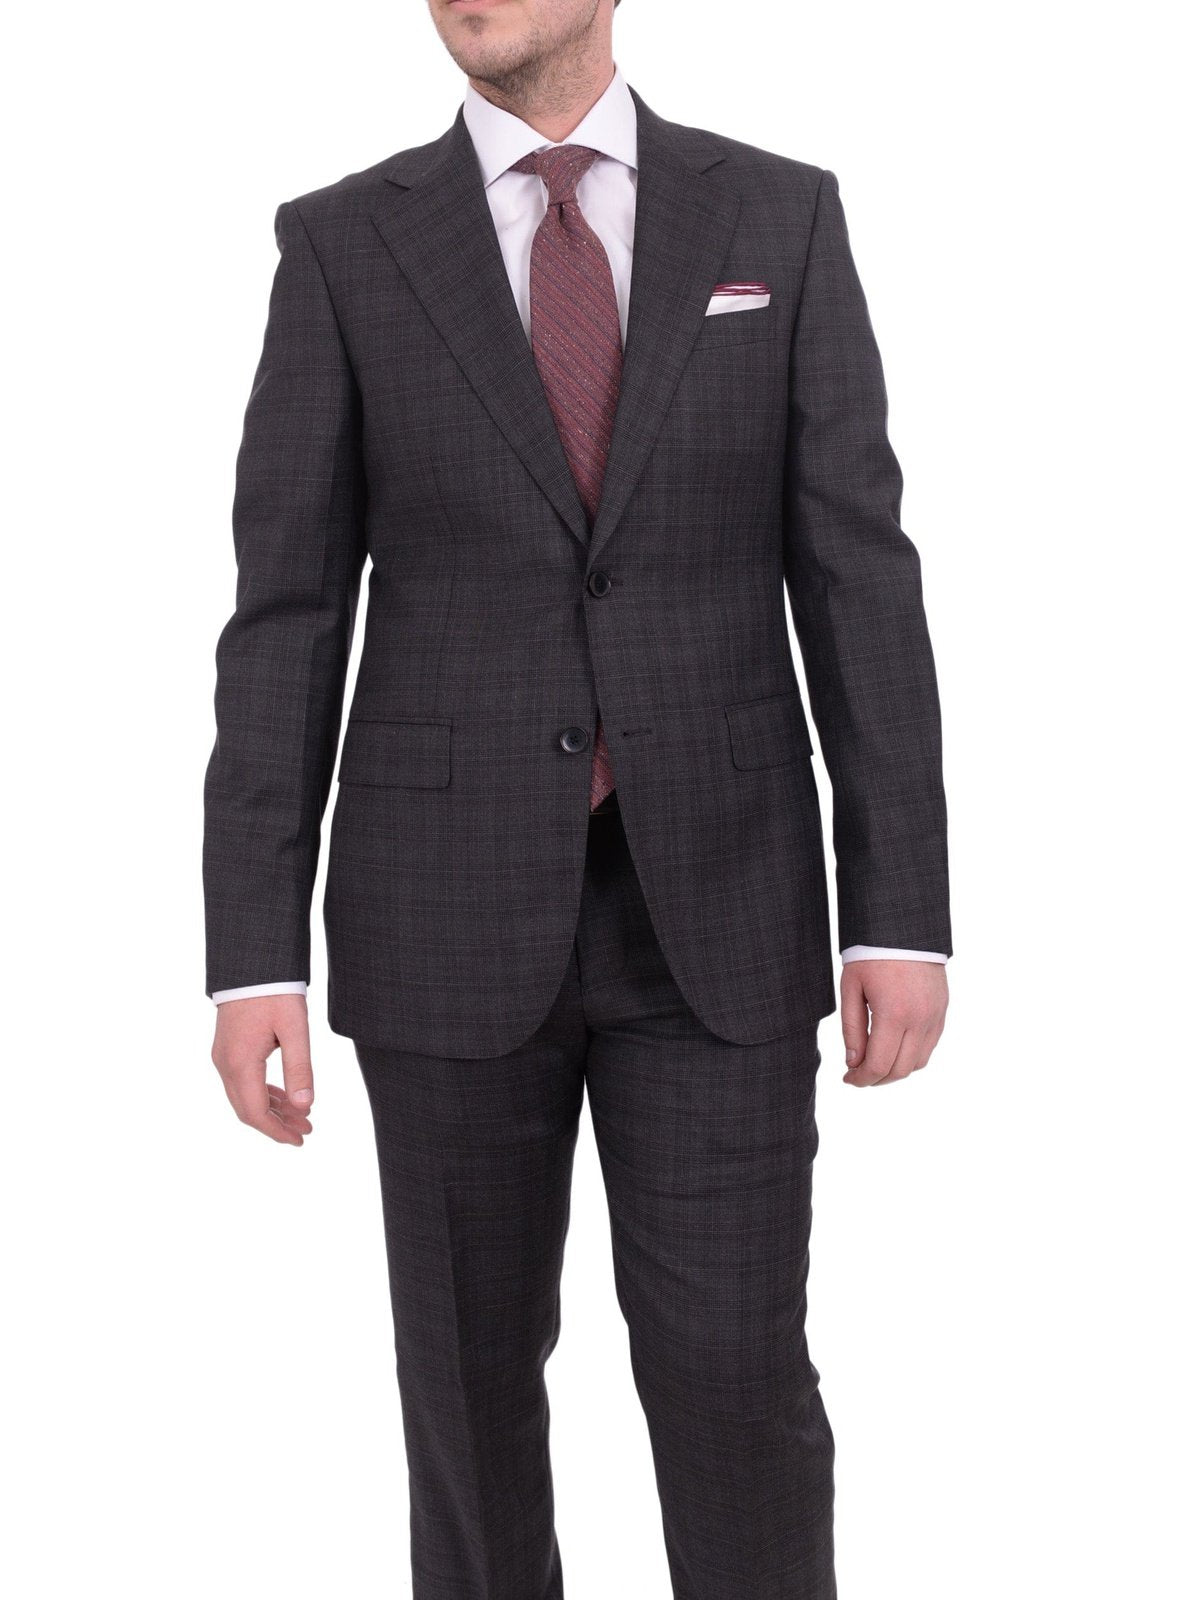 Napoli TWO PIECE SUITS Napoli Slim Fit Charcoal Gray Plaid Half Canvassed Super 150&#39;s Wool Suit